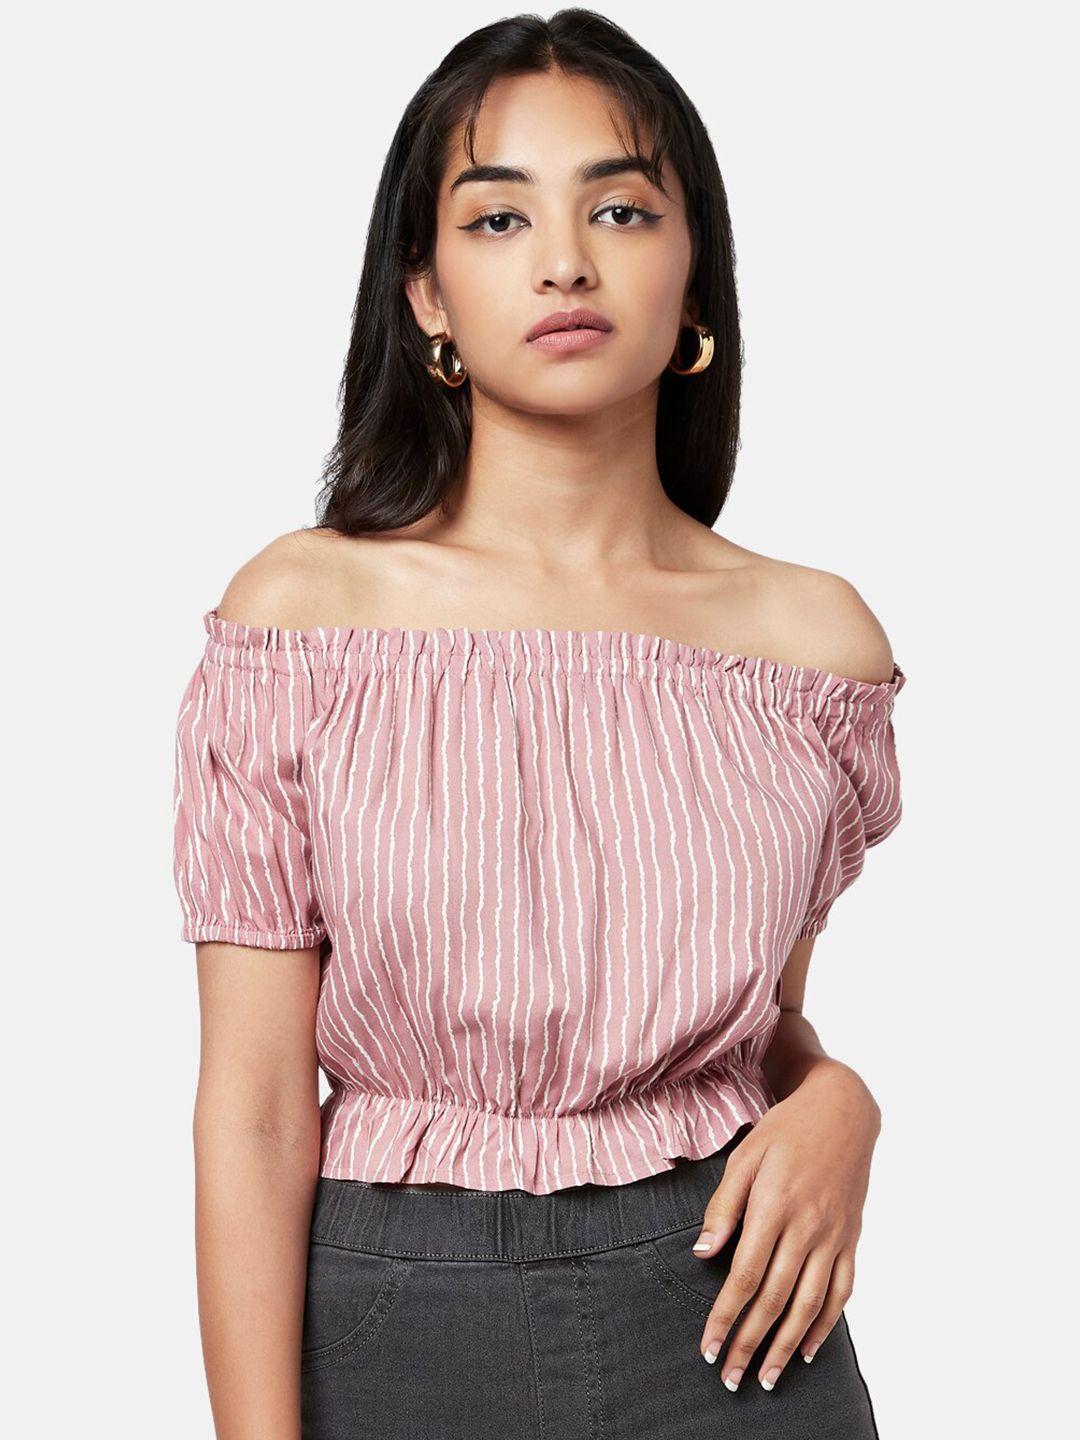 yu by pantaloons peach-coloured & white striped off-shoulder bardot crop top